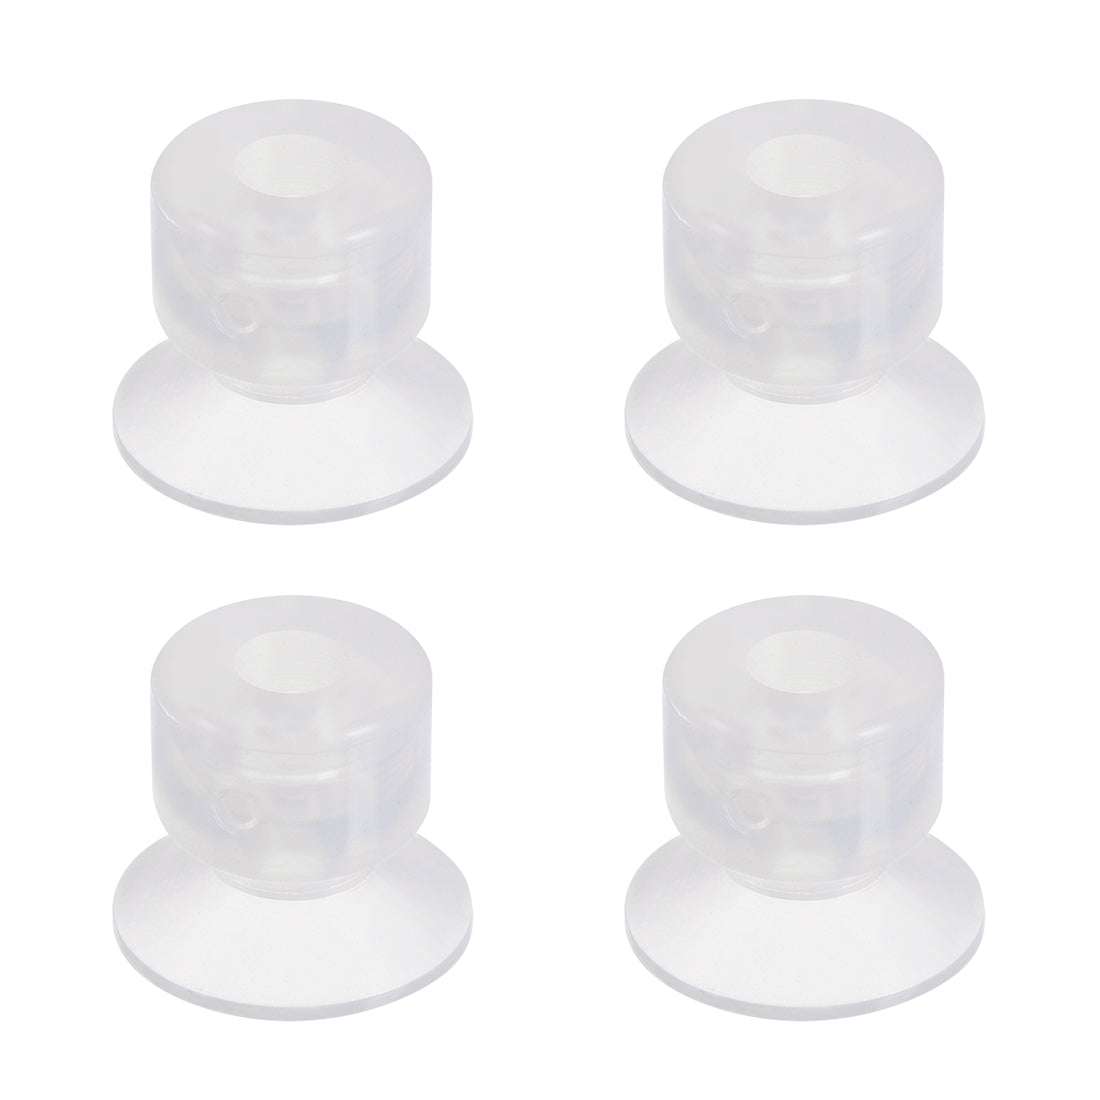 uxcell Uxcell Clear White Soft Silicone Waterproof  Miniature Vacuum Suction Cup 15mmx5mm Bellows Suction Cup,4pcs